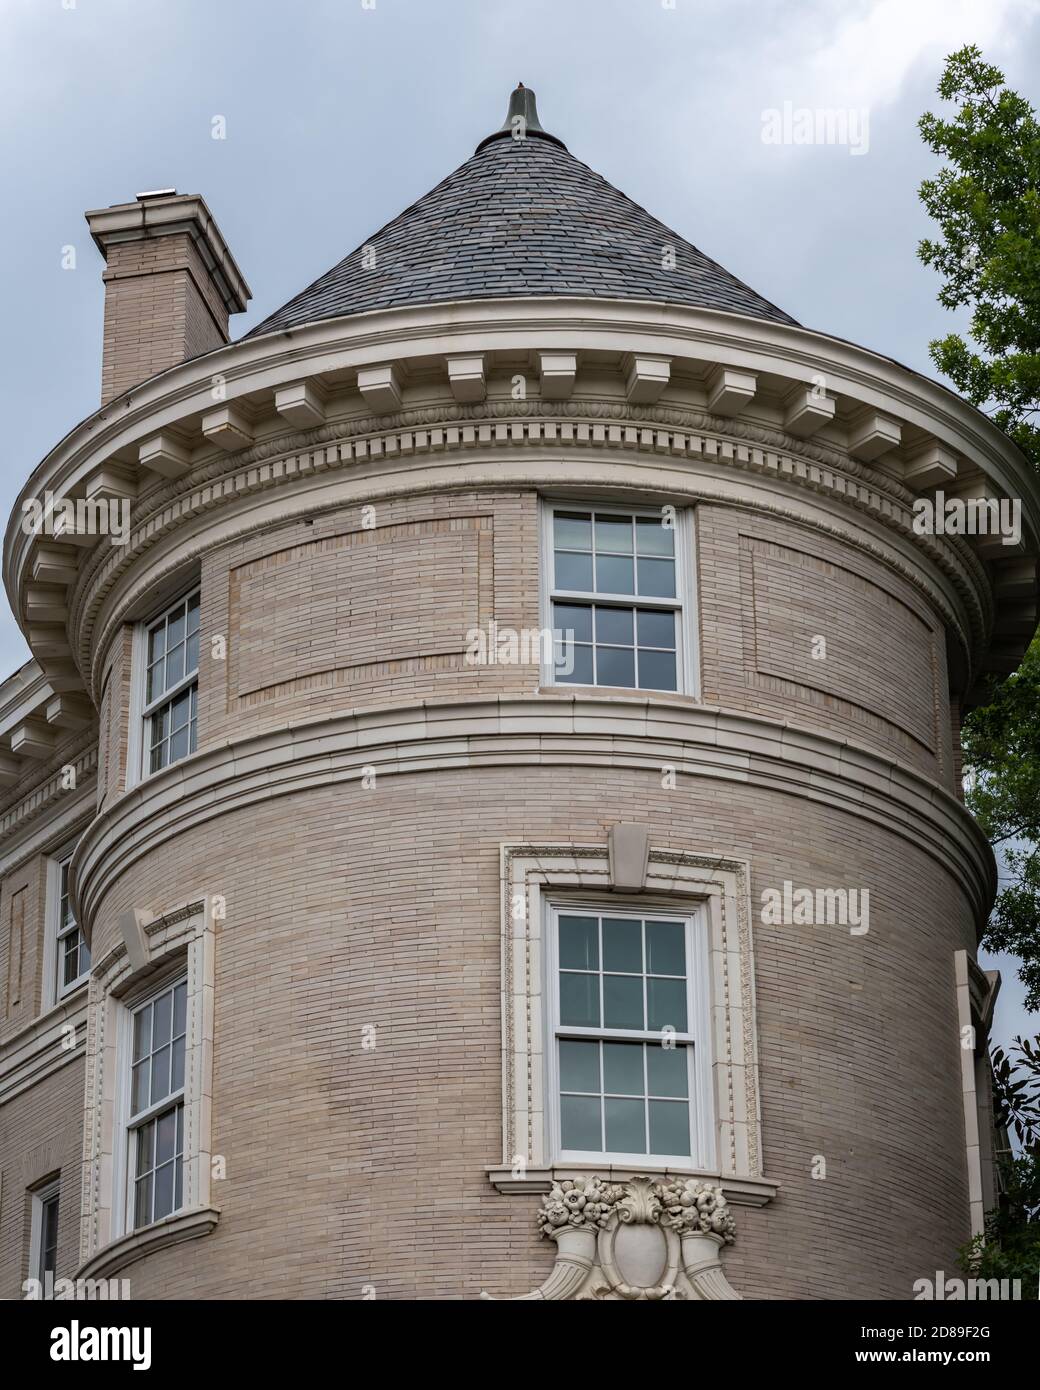 A grand corner turret fronts the Estonian Embassy on Massachusetts Avenue in Washington DC, built in 1905 for a wealthy doctor, George W. Barrie. Stock Photo